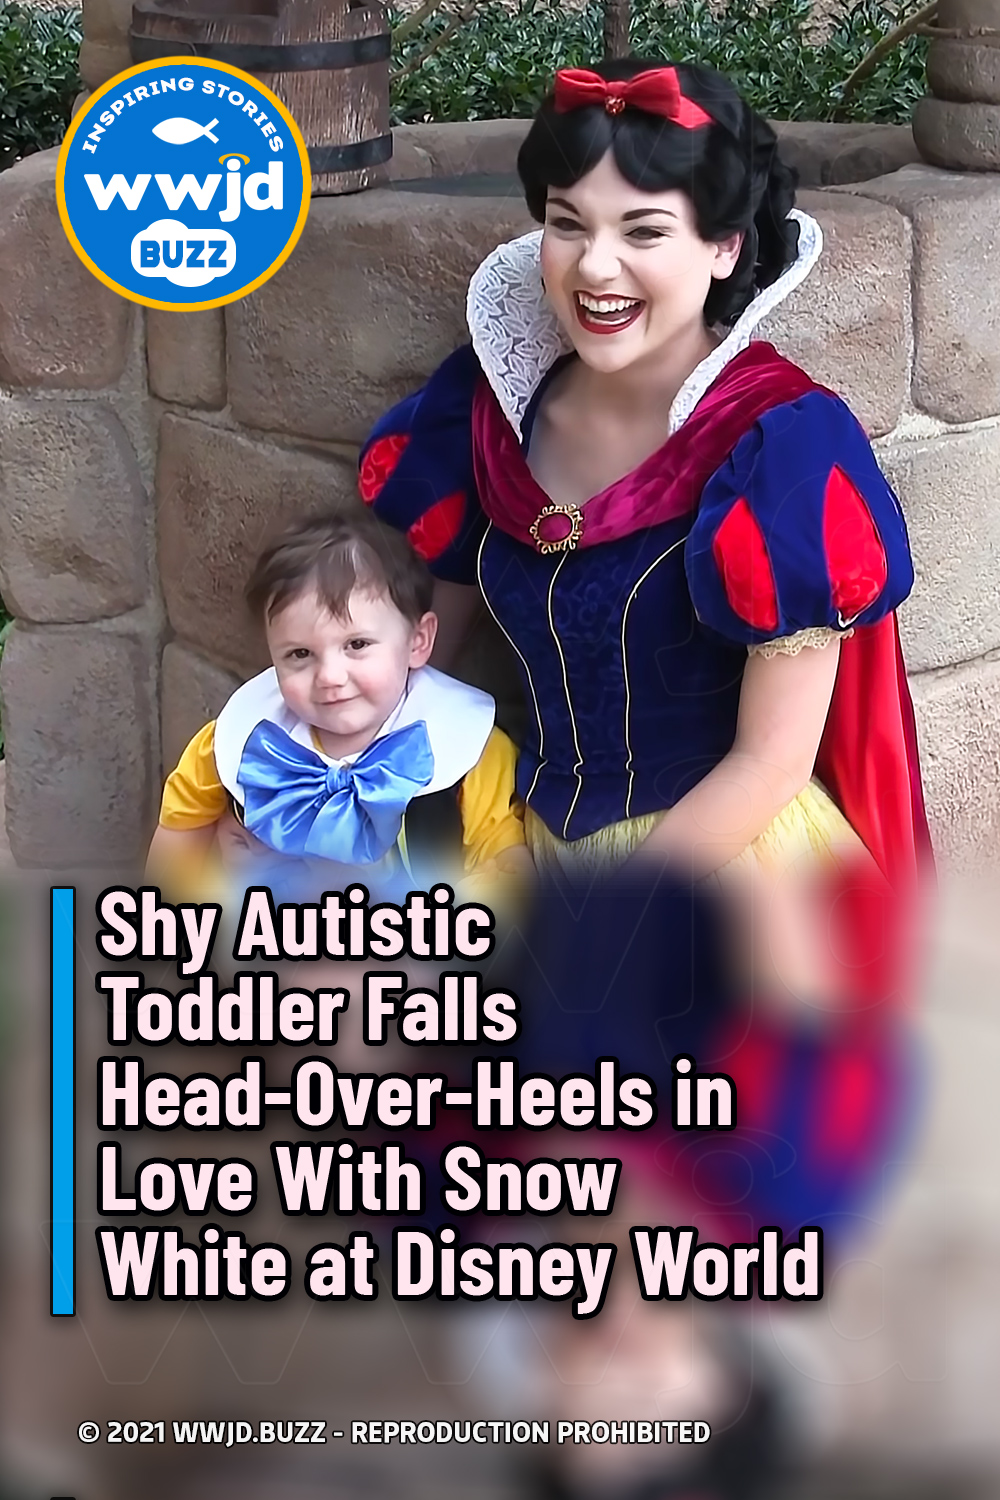 Shy Autistic Toddler Falls Head-Over-Heels in Love With Snow White at Disney World